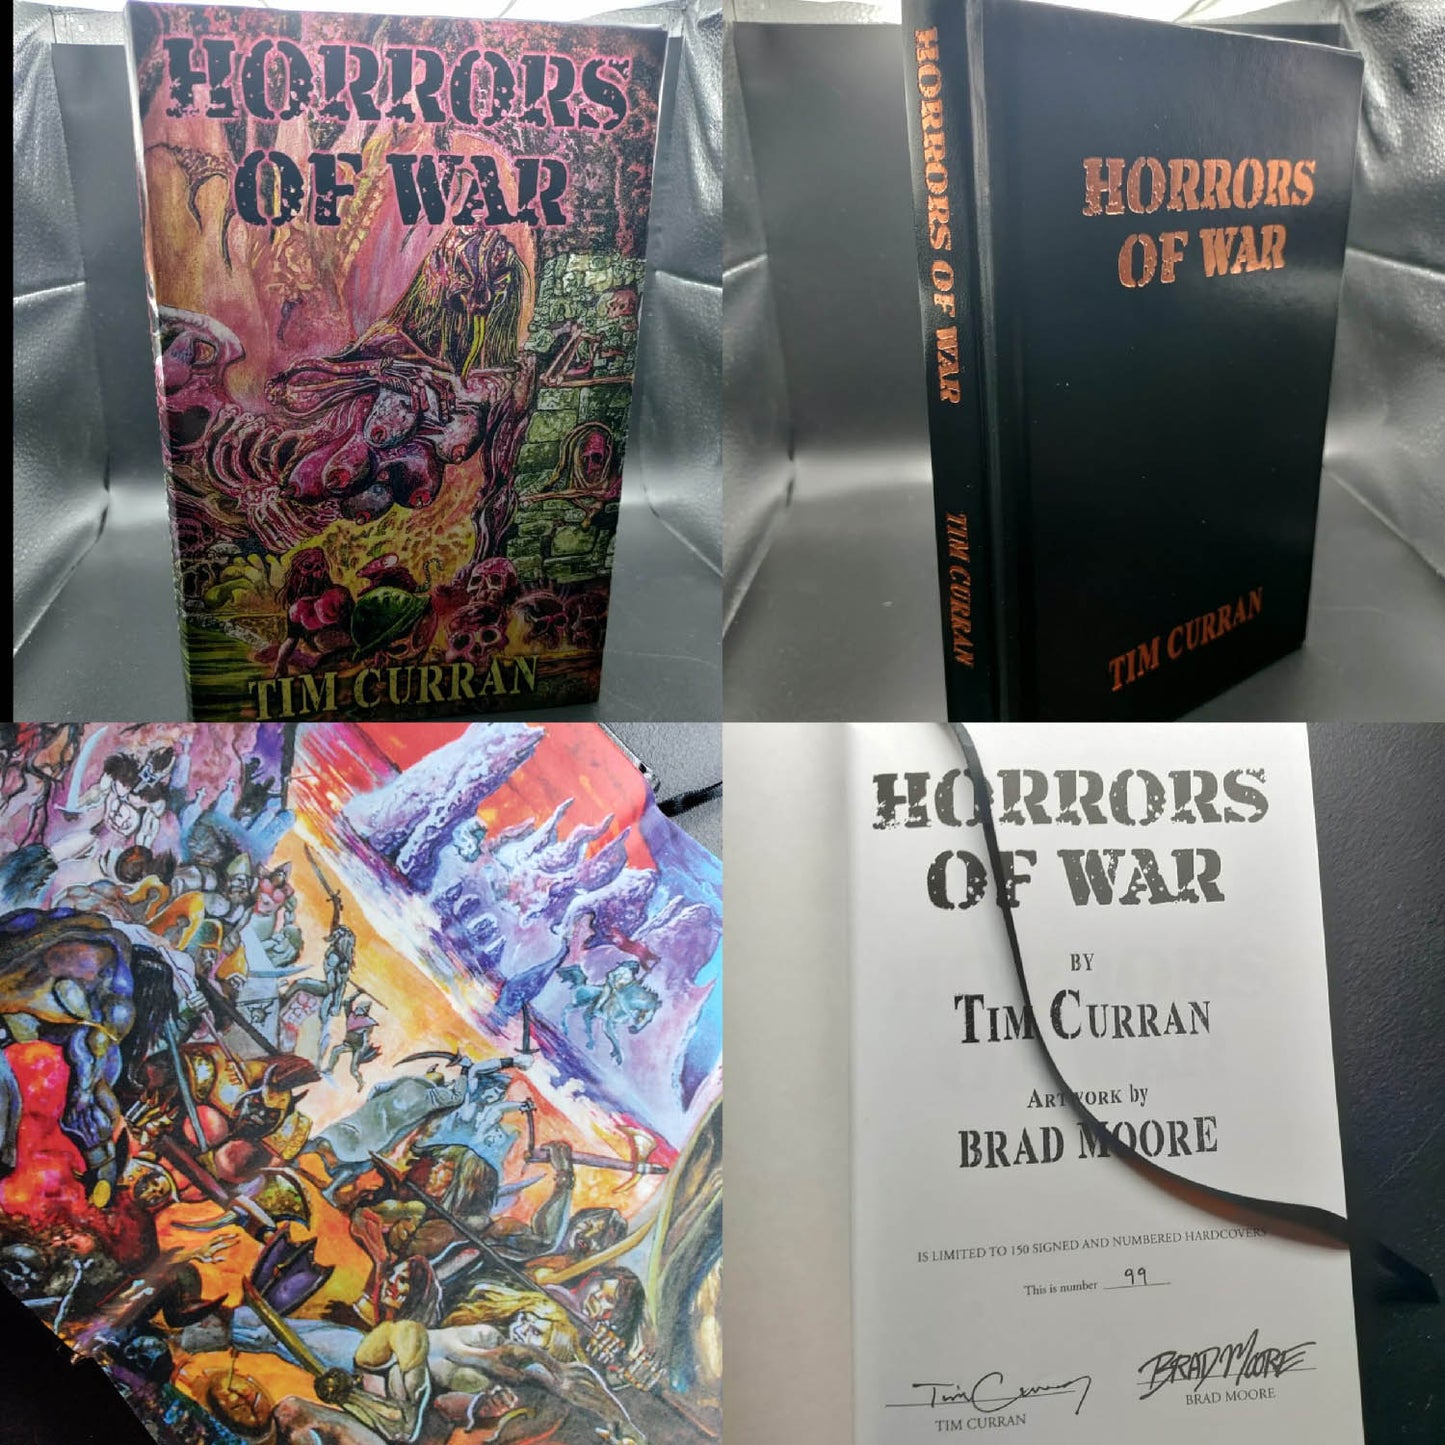 Horrors of War by Tim Curran